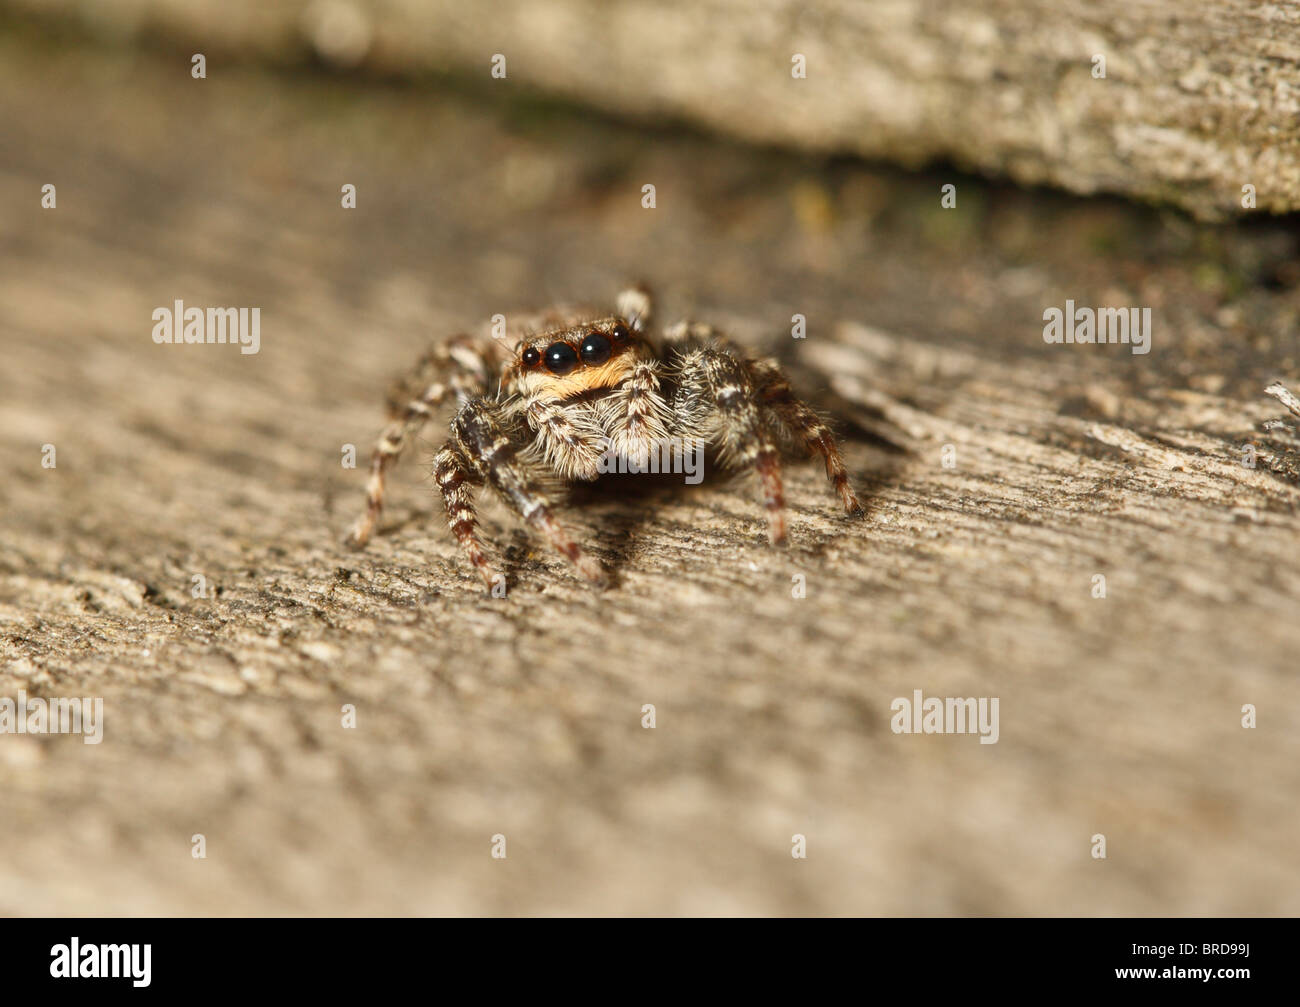 A Fencepost Spider looking at the camera showing 2 pairs of eyes Stock Photo